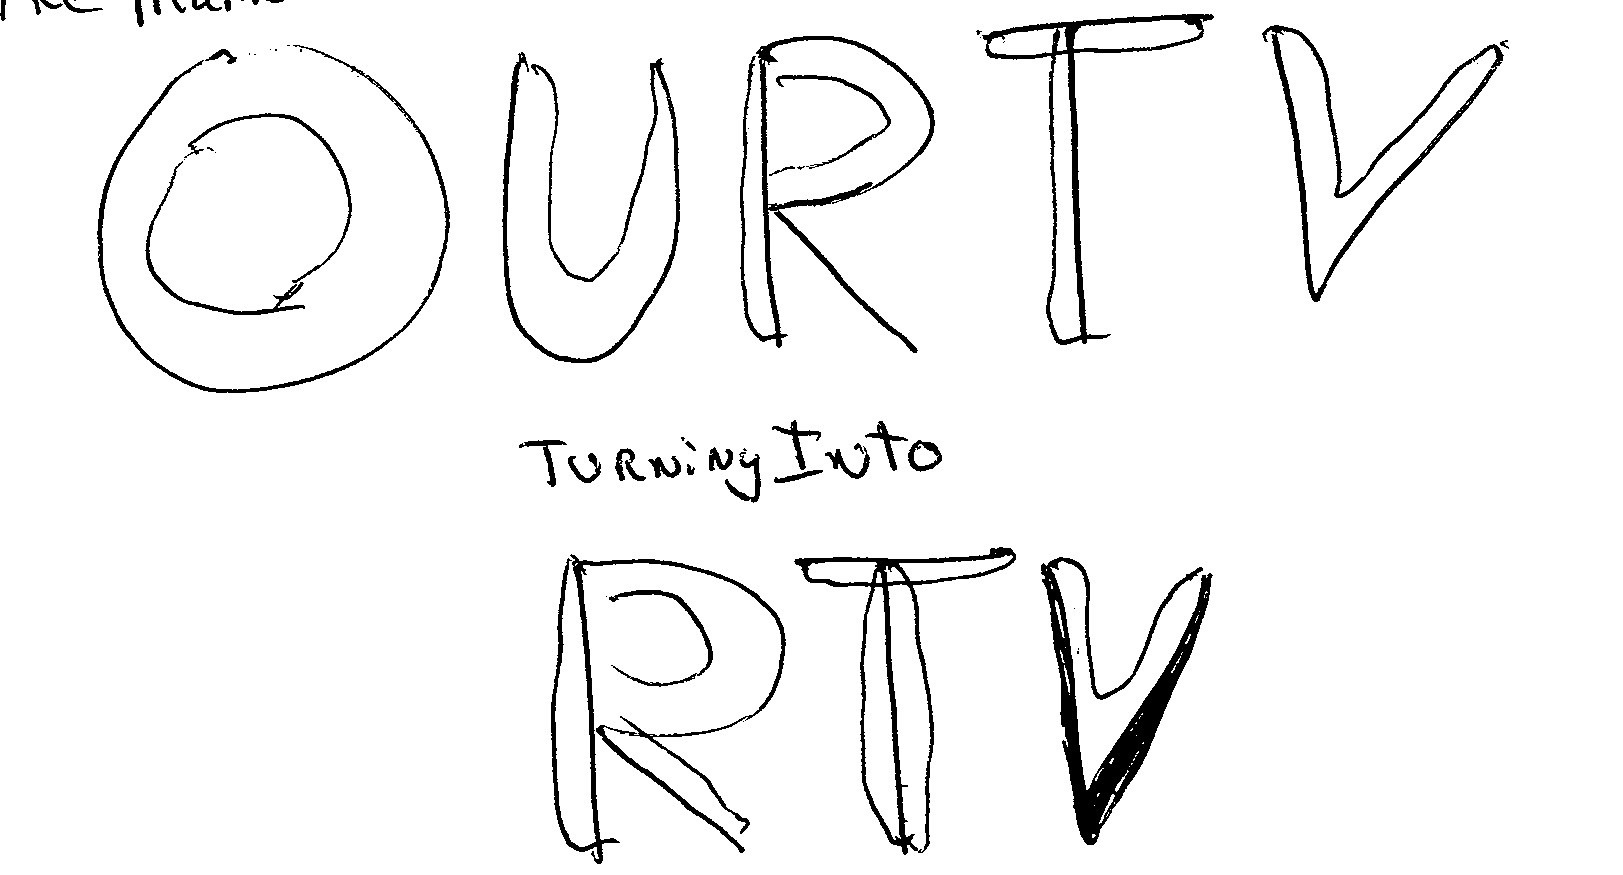  OUR TV TURNING INTO RTV